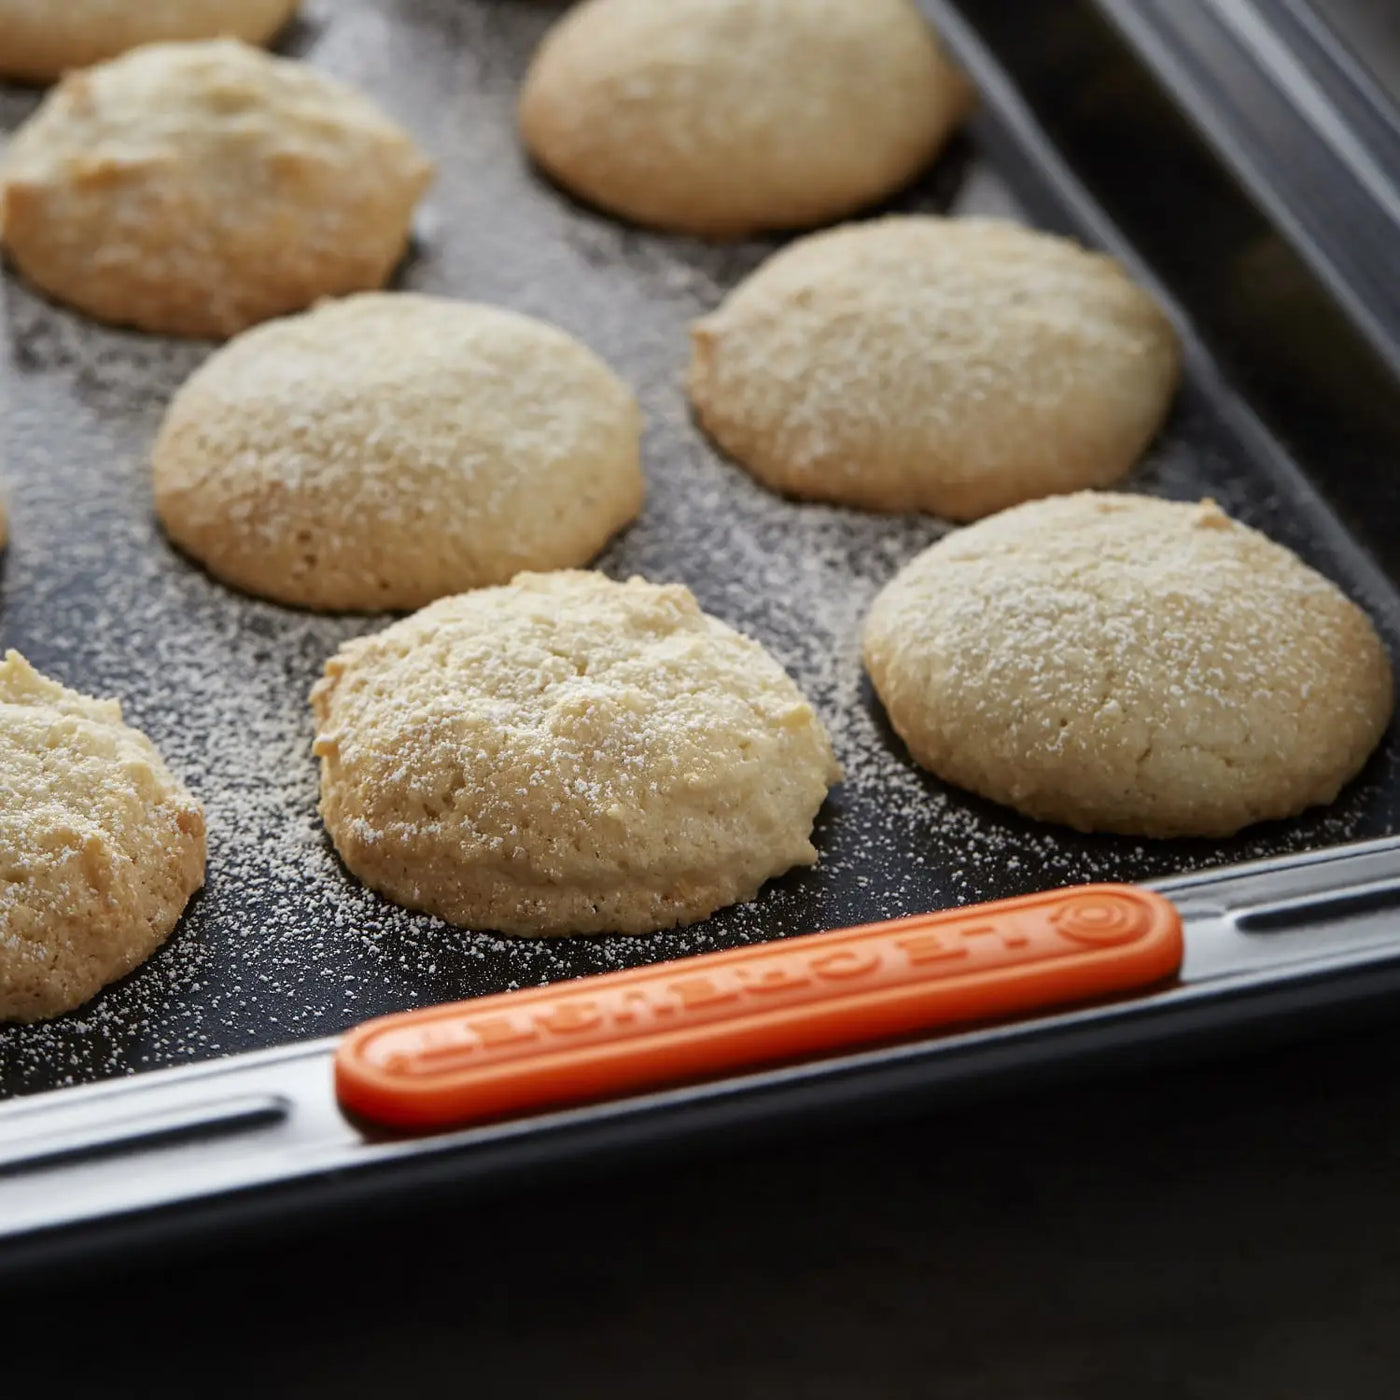 Le Creuset Toughened Non-Stick Baking Tray with biscuits